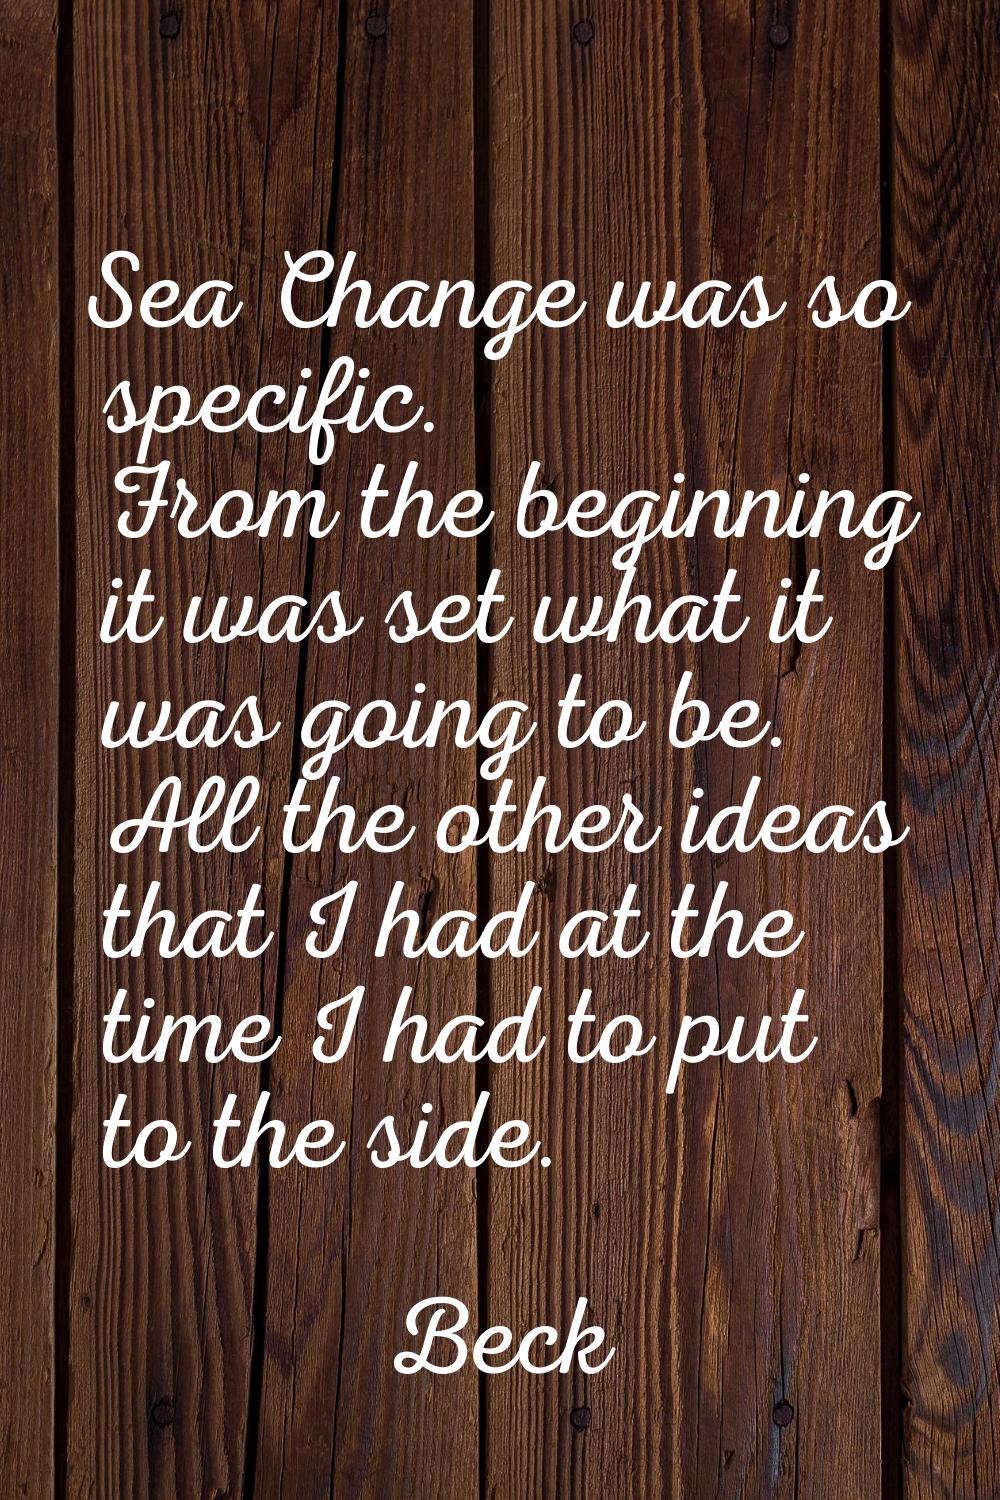 Sea Change was so specific. From the beginning it was set what it was going to be. All the other id